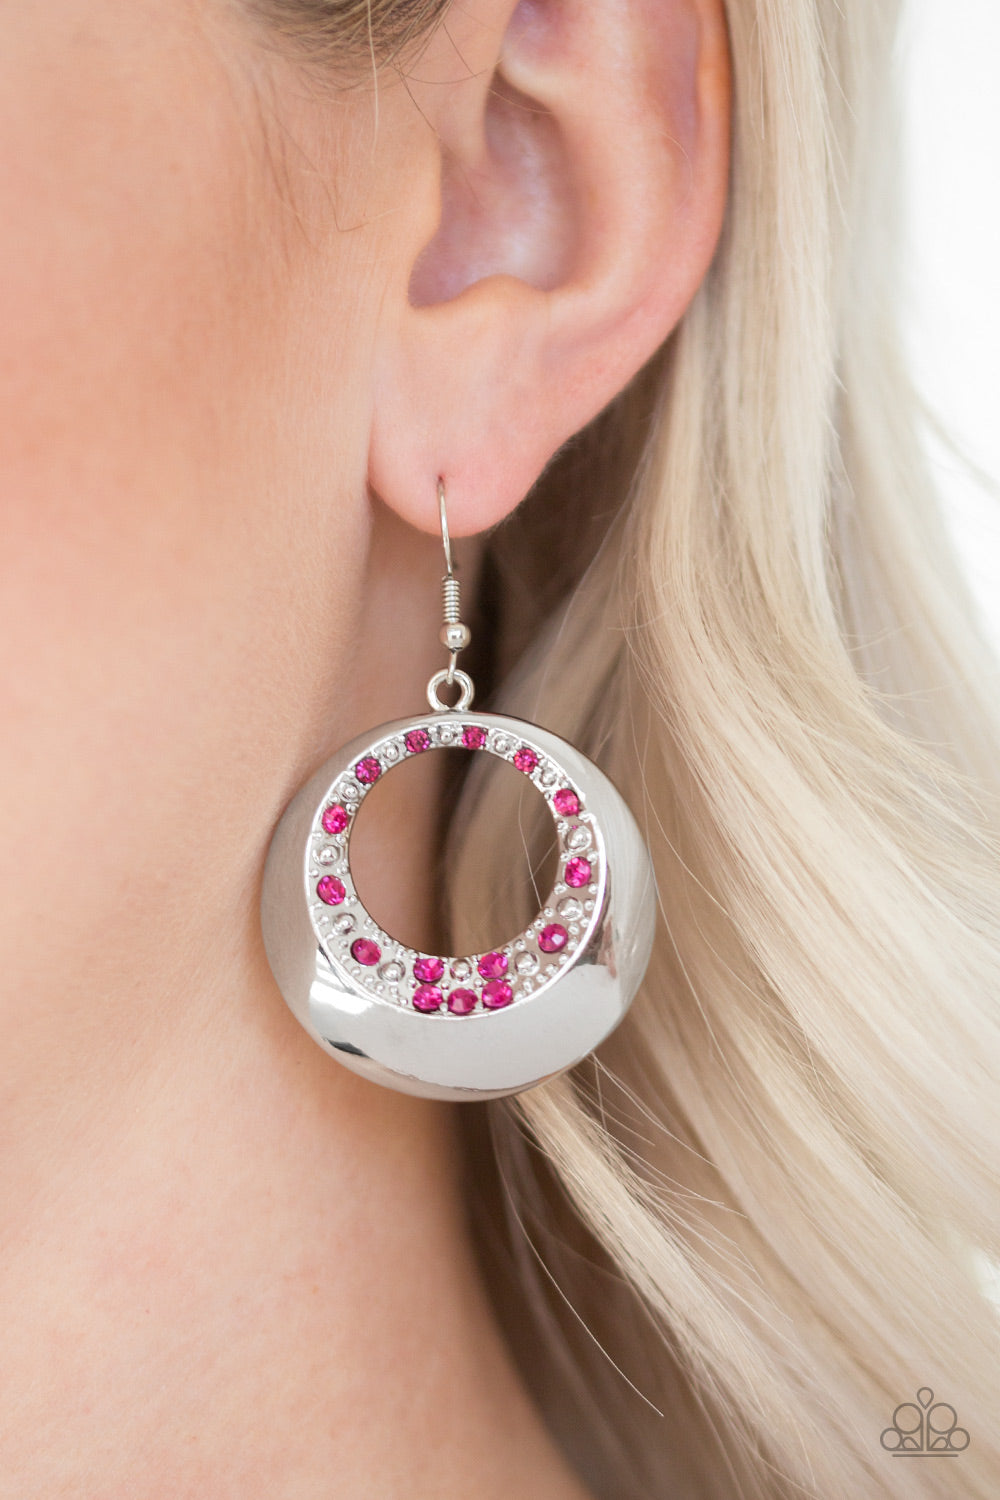 Ringed In Refinement - Pink Paparazzi Earrings